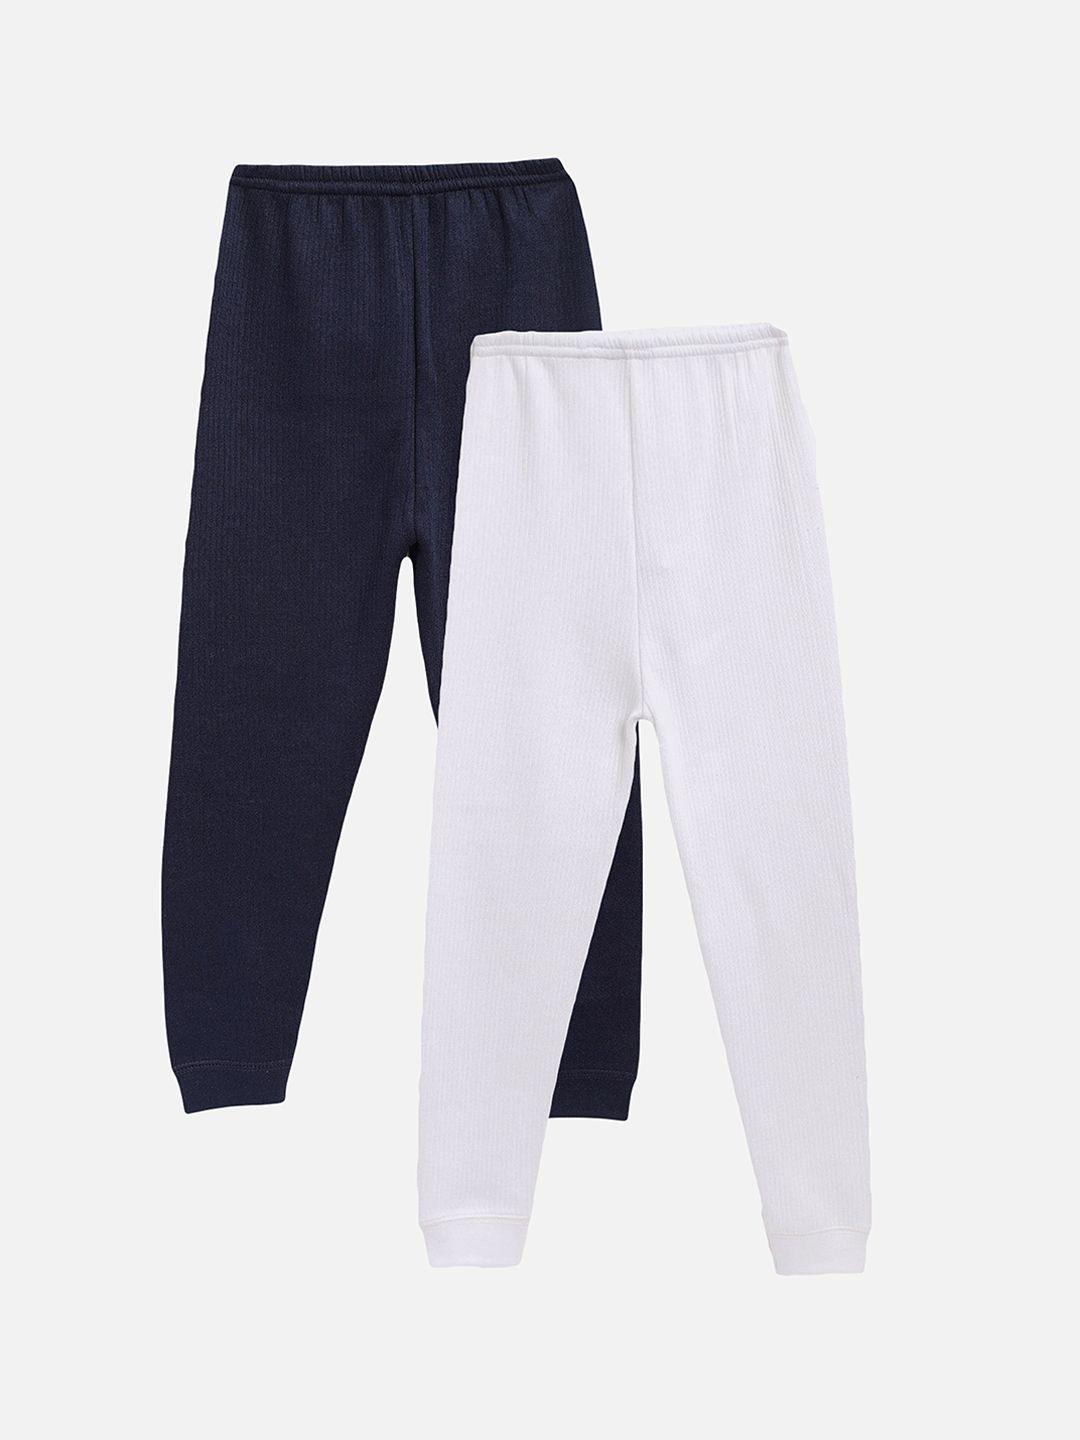 kanvin-boys--pack-of-2-navy-blue-&-white--solid-thermal-bottoms